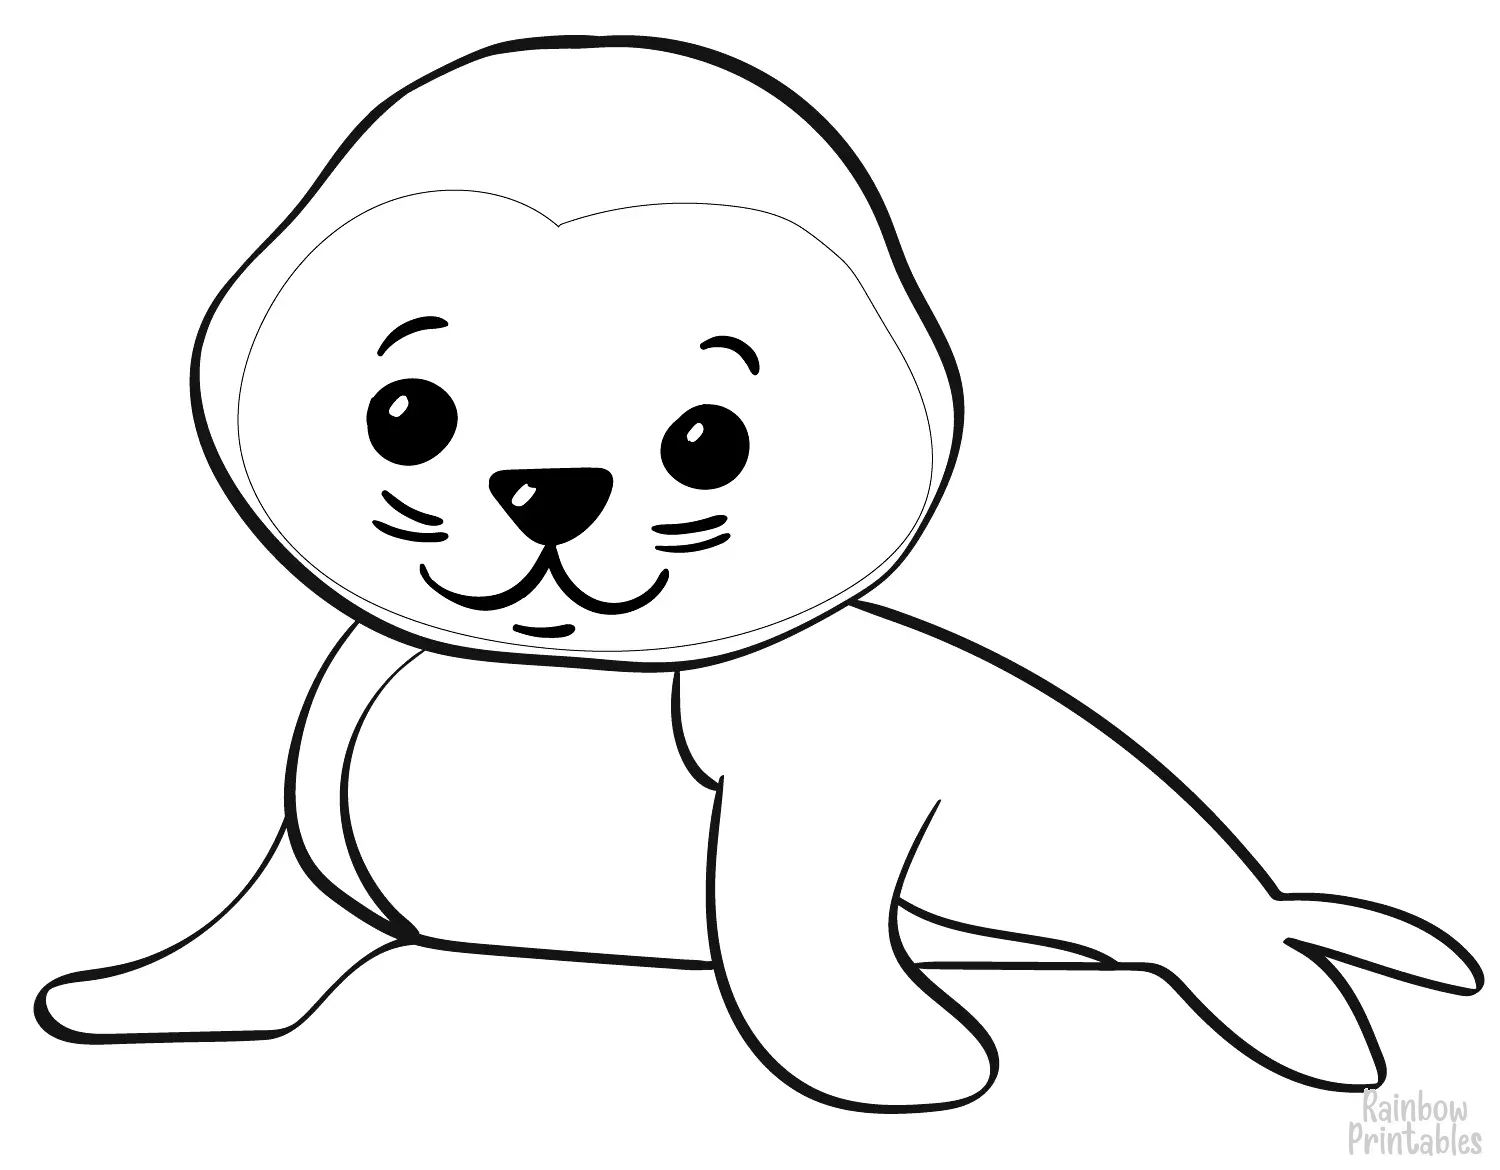 SIMPLE-EASY-line-drawings-CARTOON-SEAL-coloring-page-for-kids